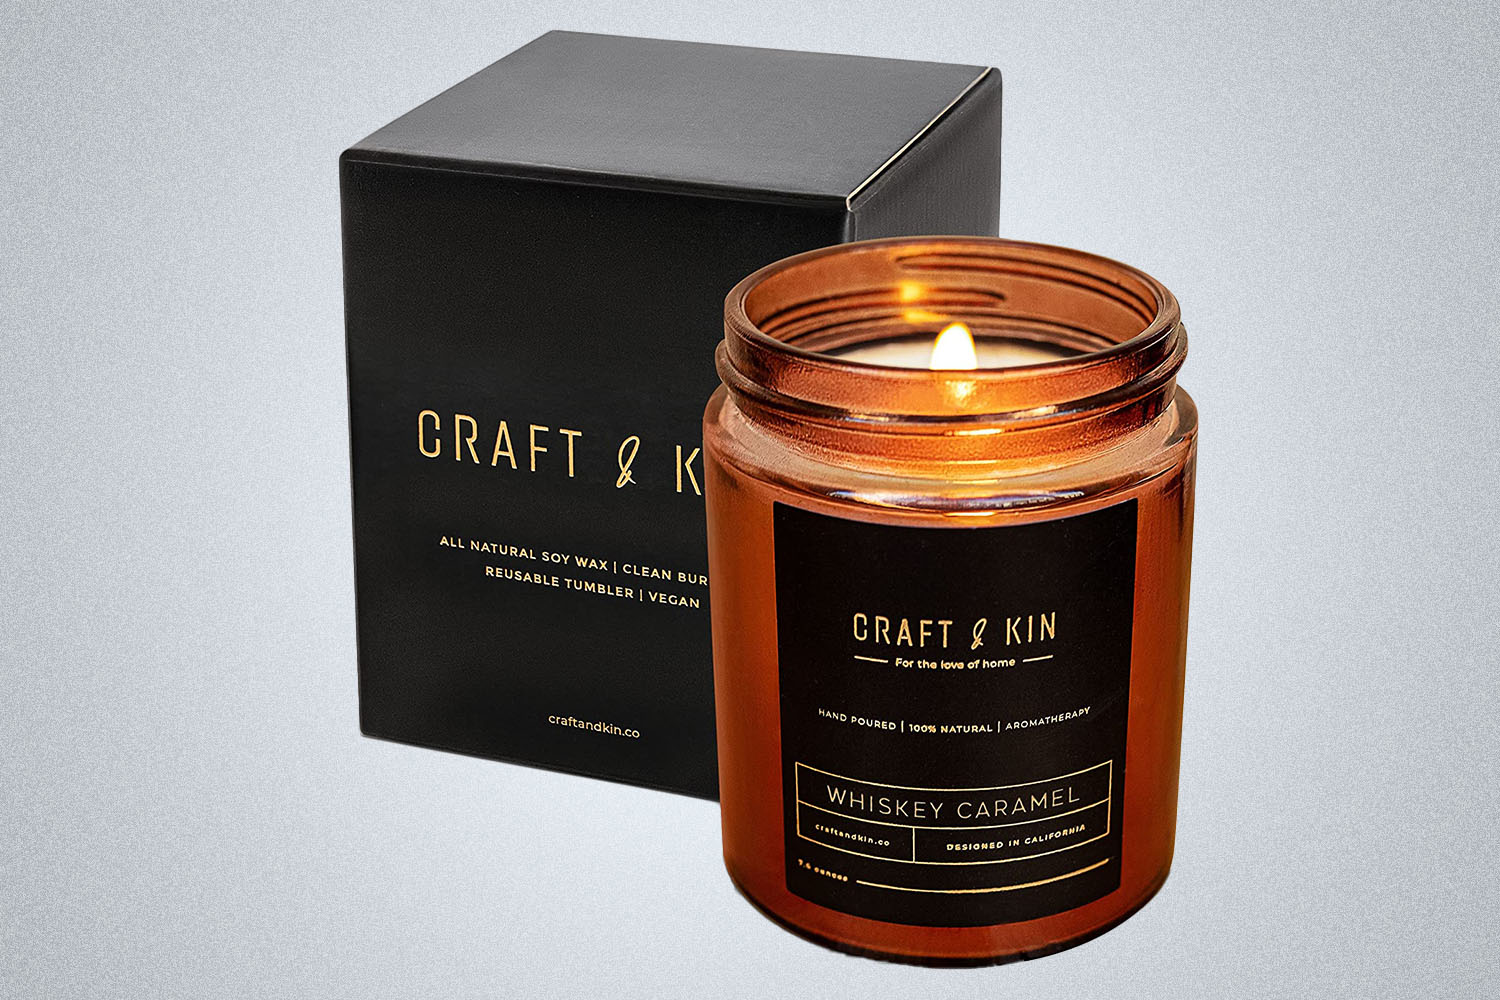 a Craft and Kin Whiskey-scented candle on a grey background